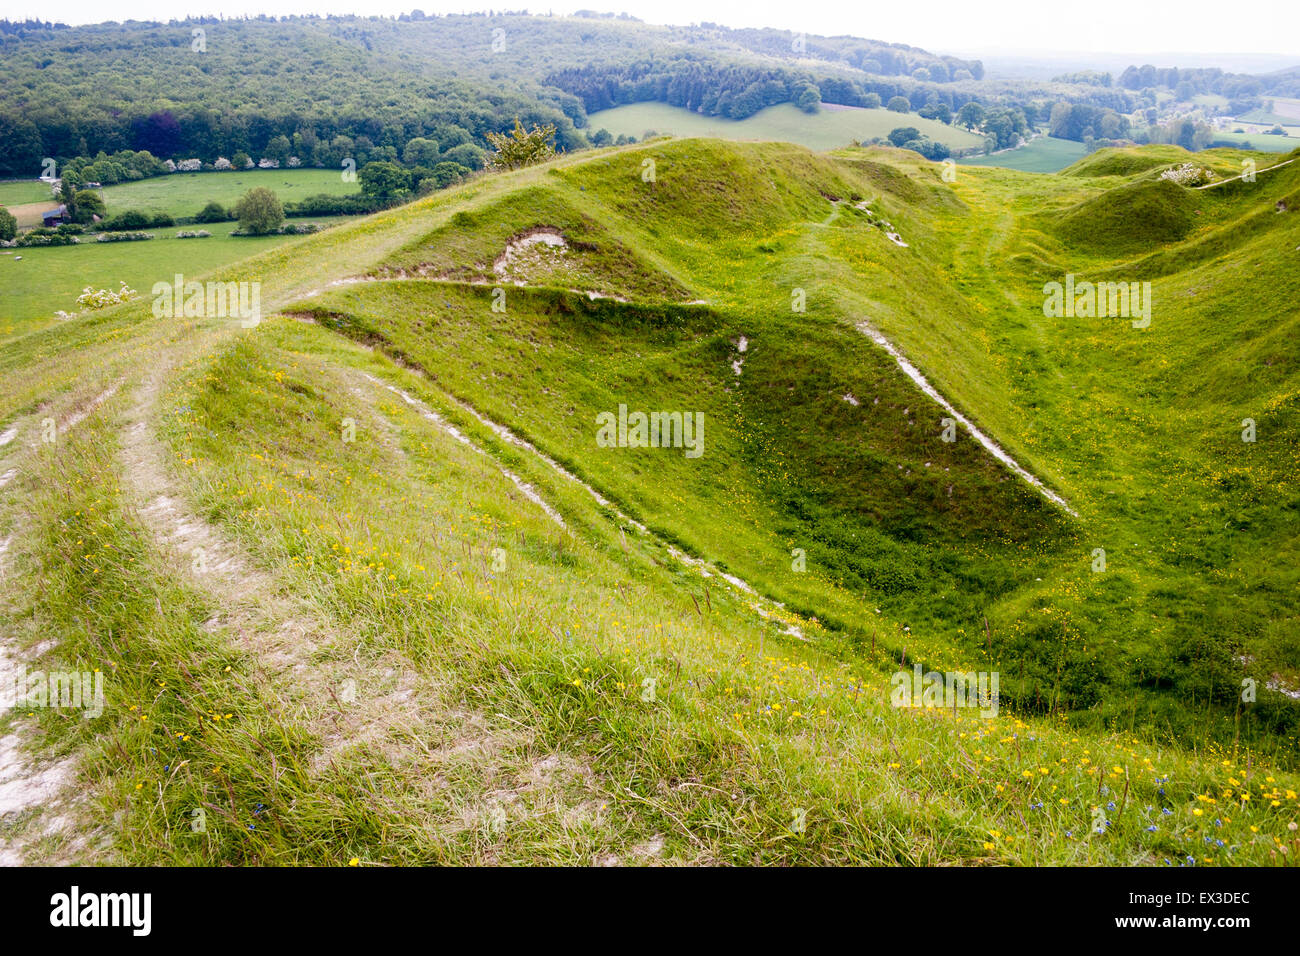 Crey Hill, Wiltshire, England. A Neolitic hill fort site. View from top of ridgeway path winding up and around a dead-end killing zone Stock Photo